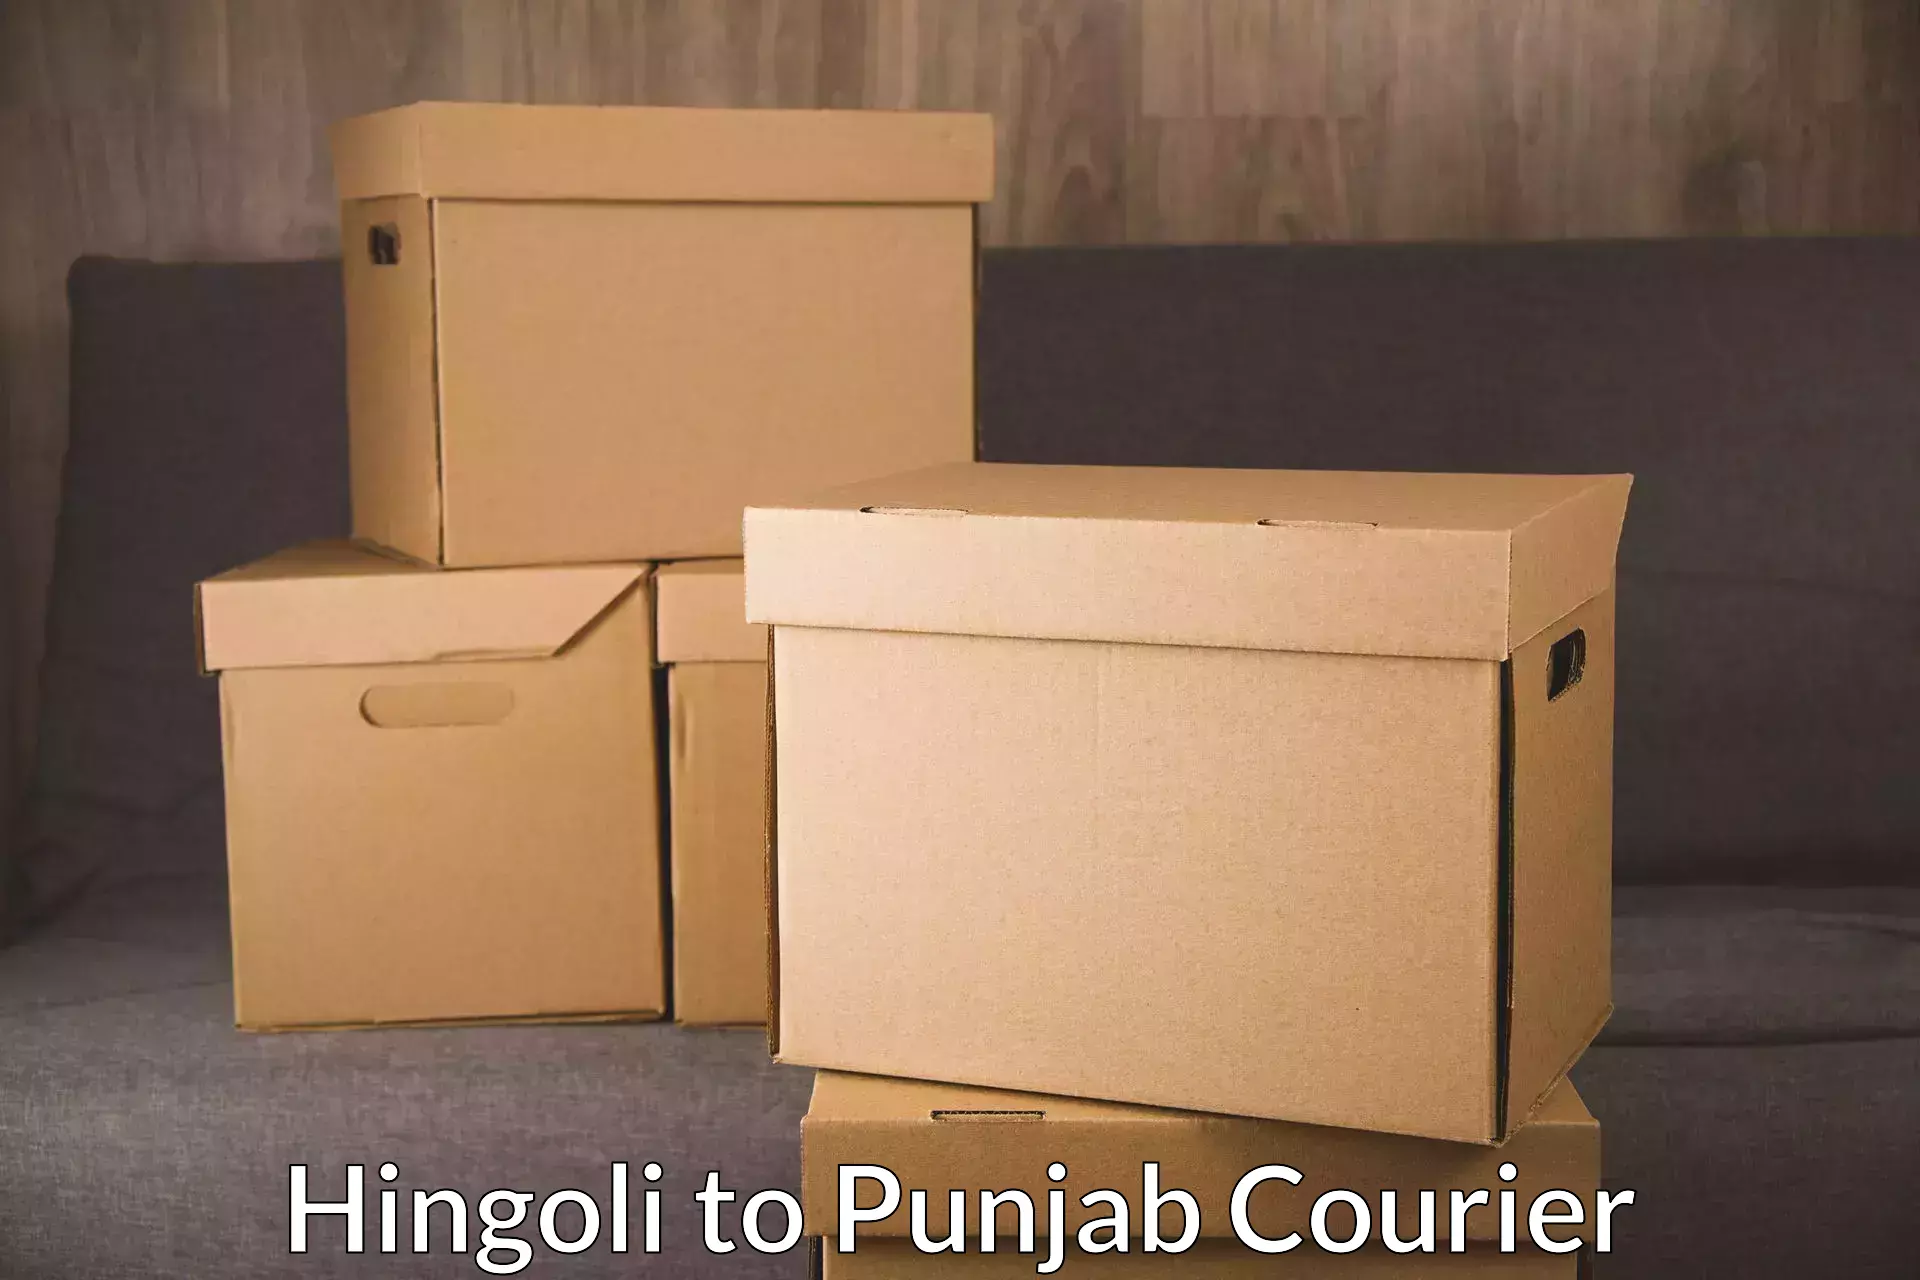 Sustainable shipping practices Hingoli to Mohali